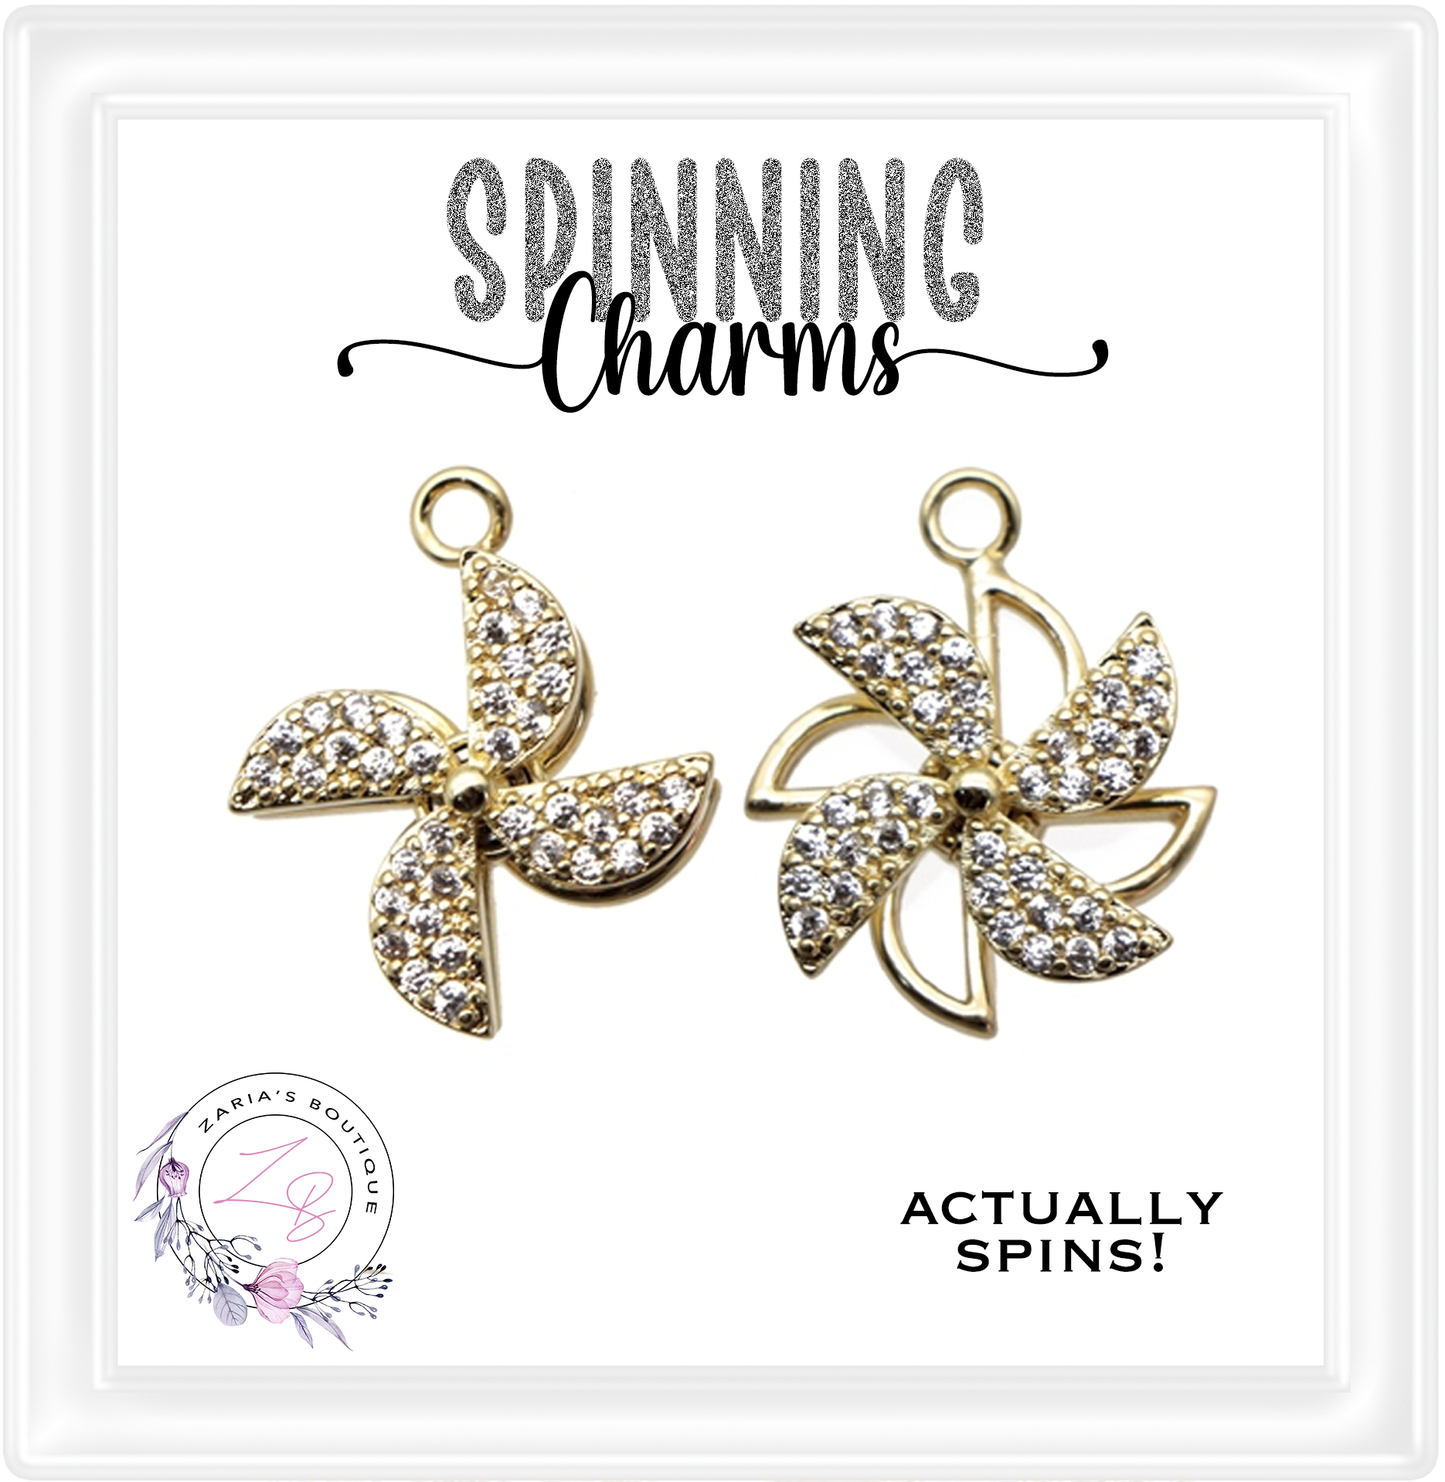 ⋅ Spinning Windmills ⋅ Pinwheel Charms ⋅ Jewellery Components ⋅ 1 pc